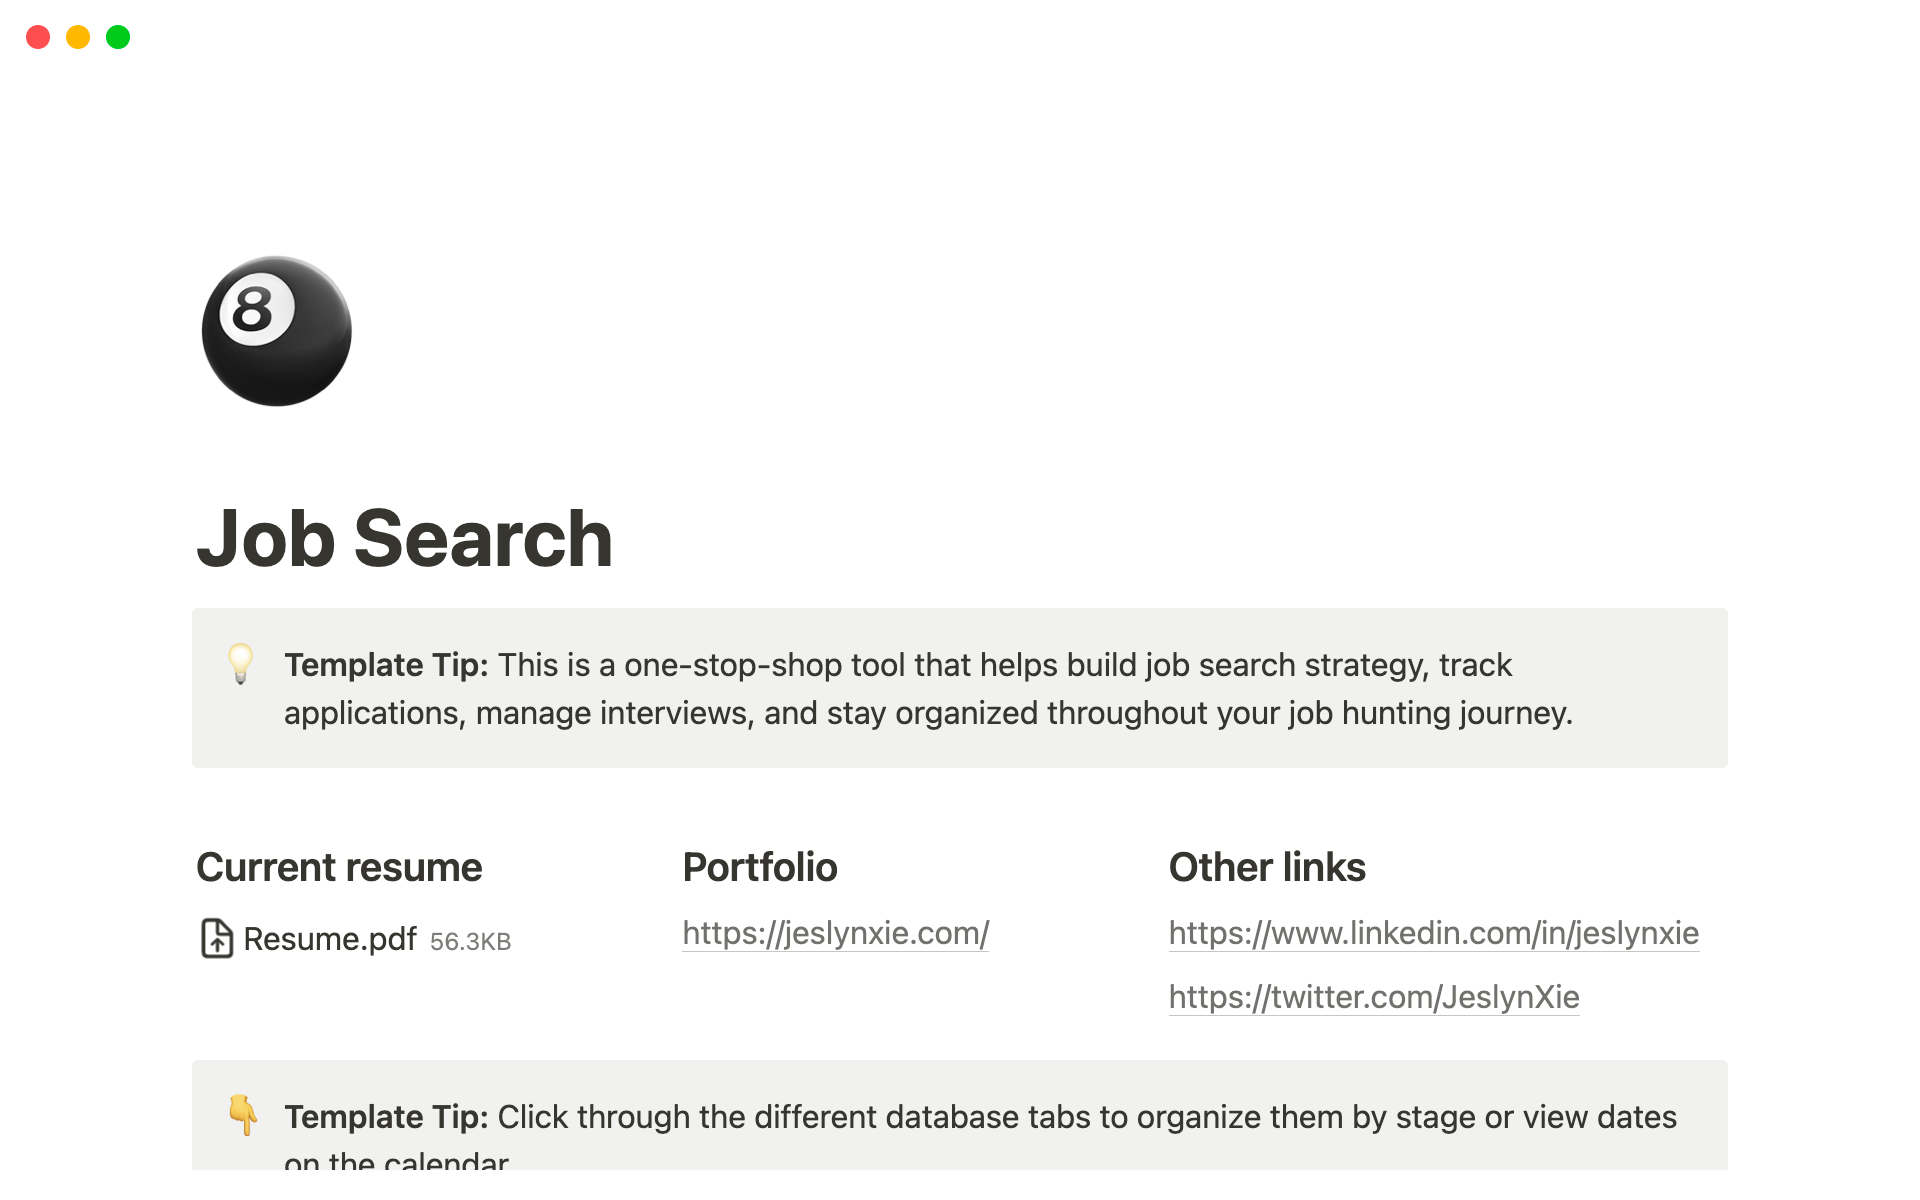 A one-stop-shop tool that helps build job search strategy, track applications, manage interviews, and stay organized throughout the job hunting journey.